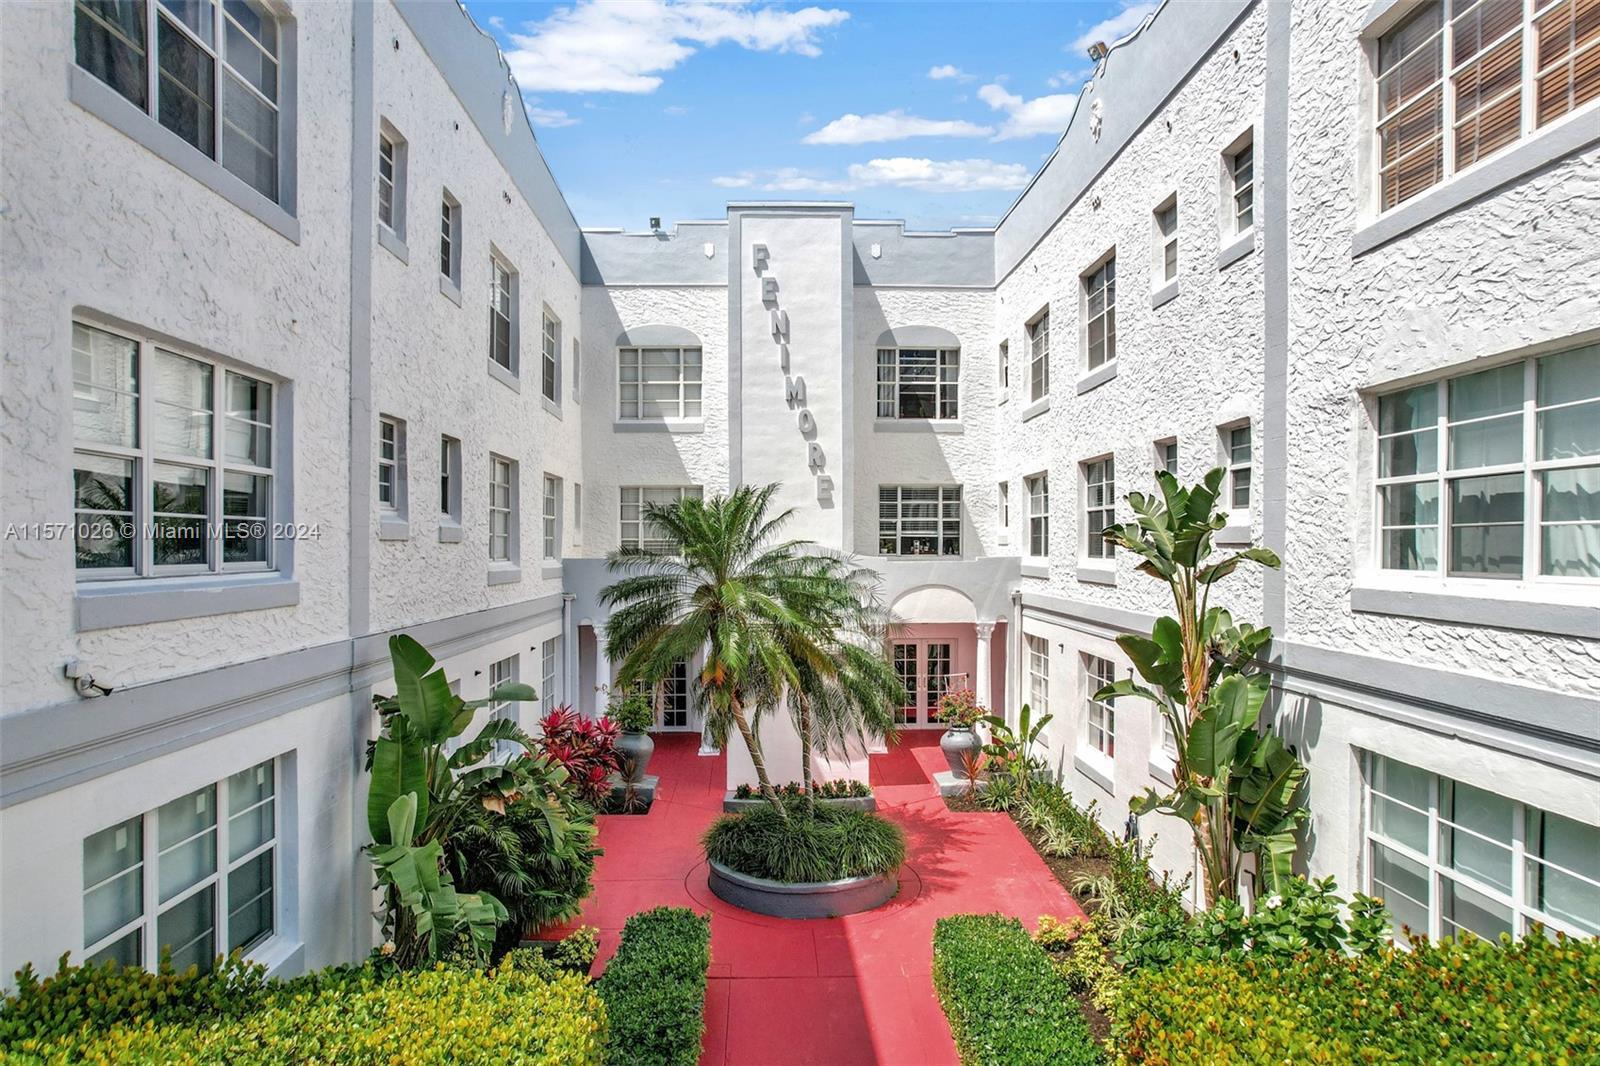 Welcome to this charming one-bedroom, one-bathroom corner unit condo in the heart of Miami Beach. Th